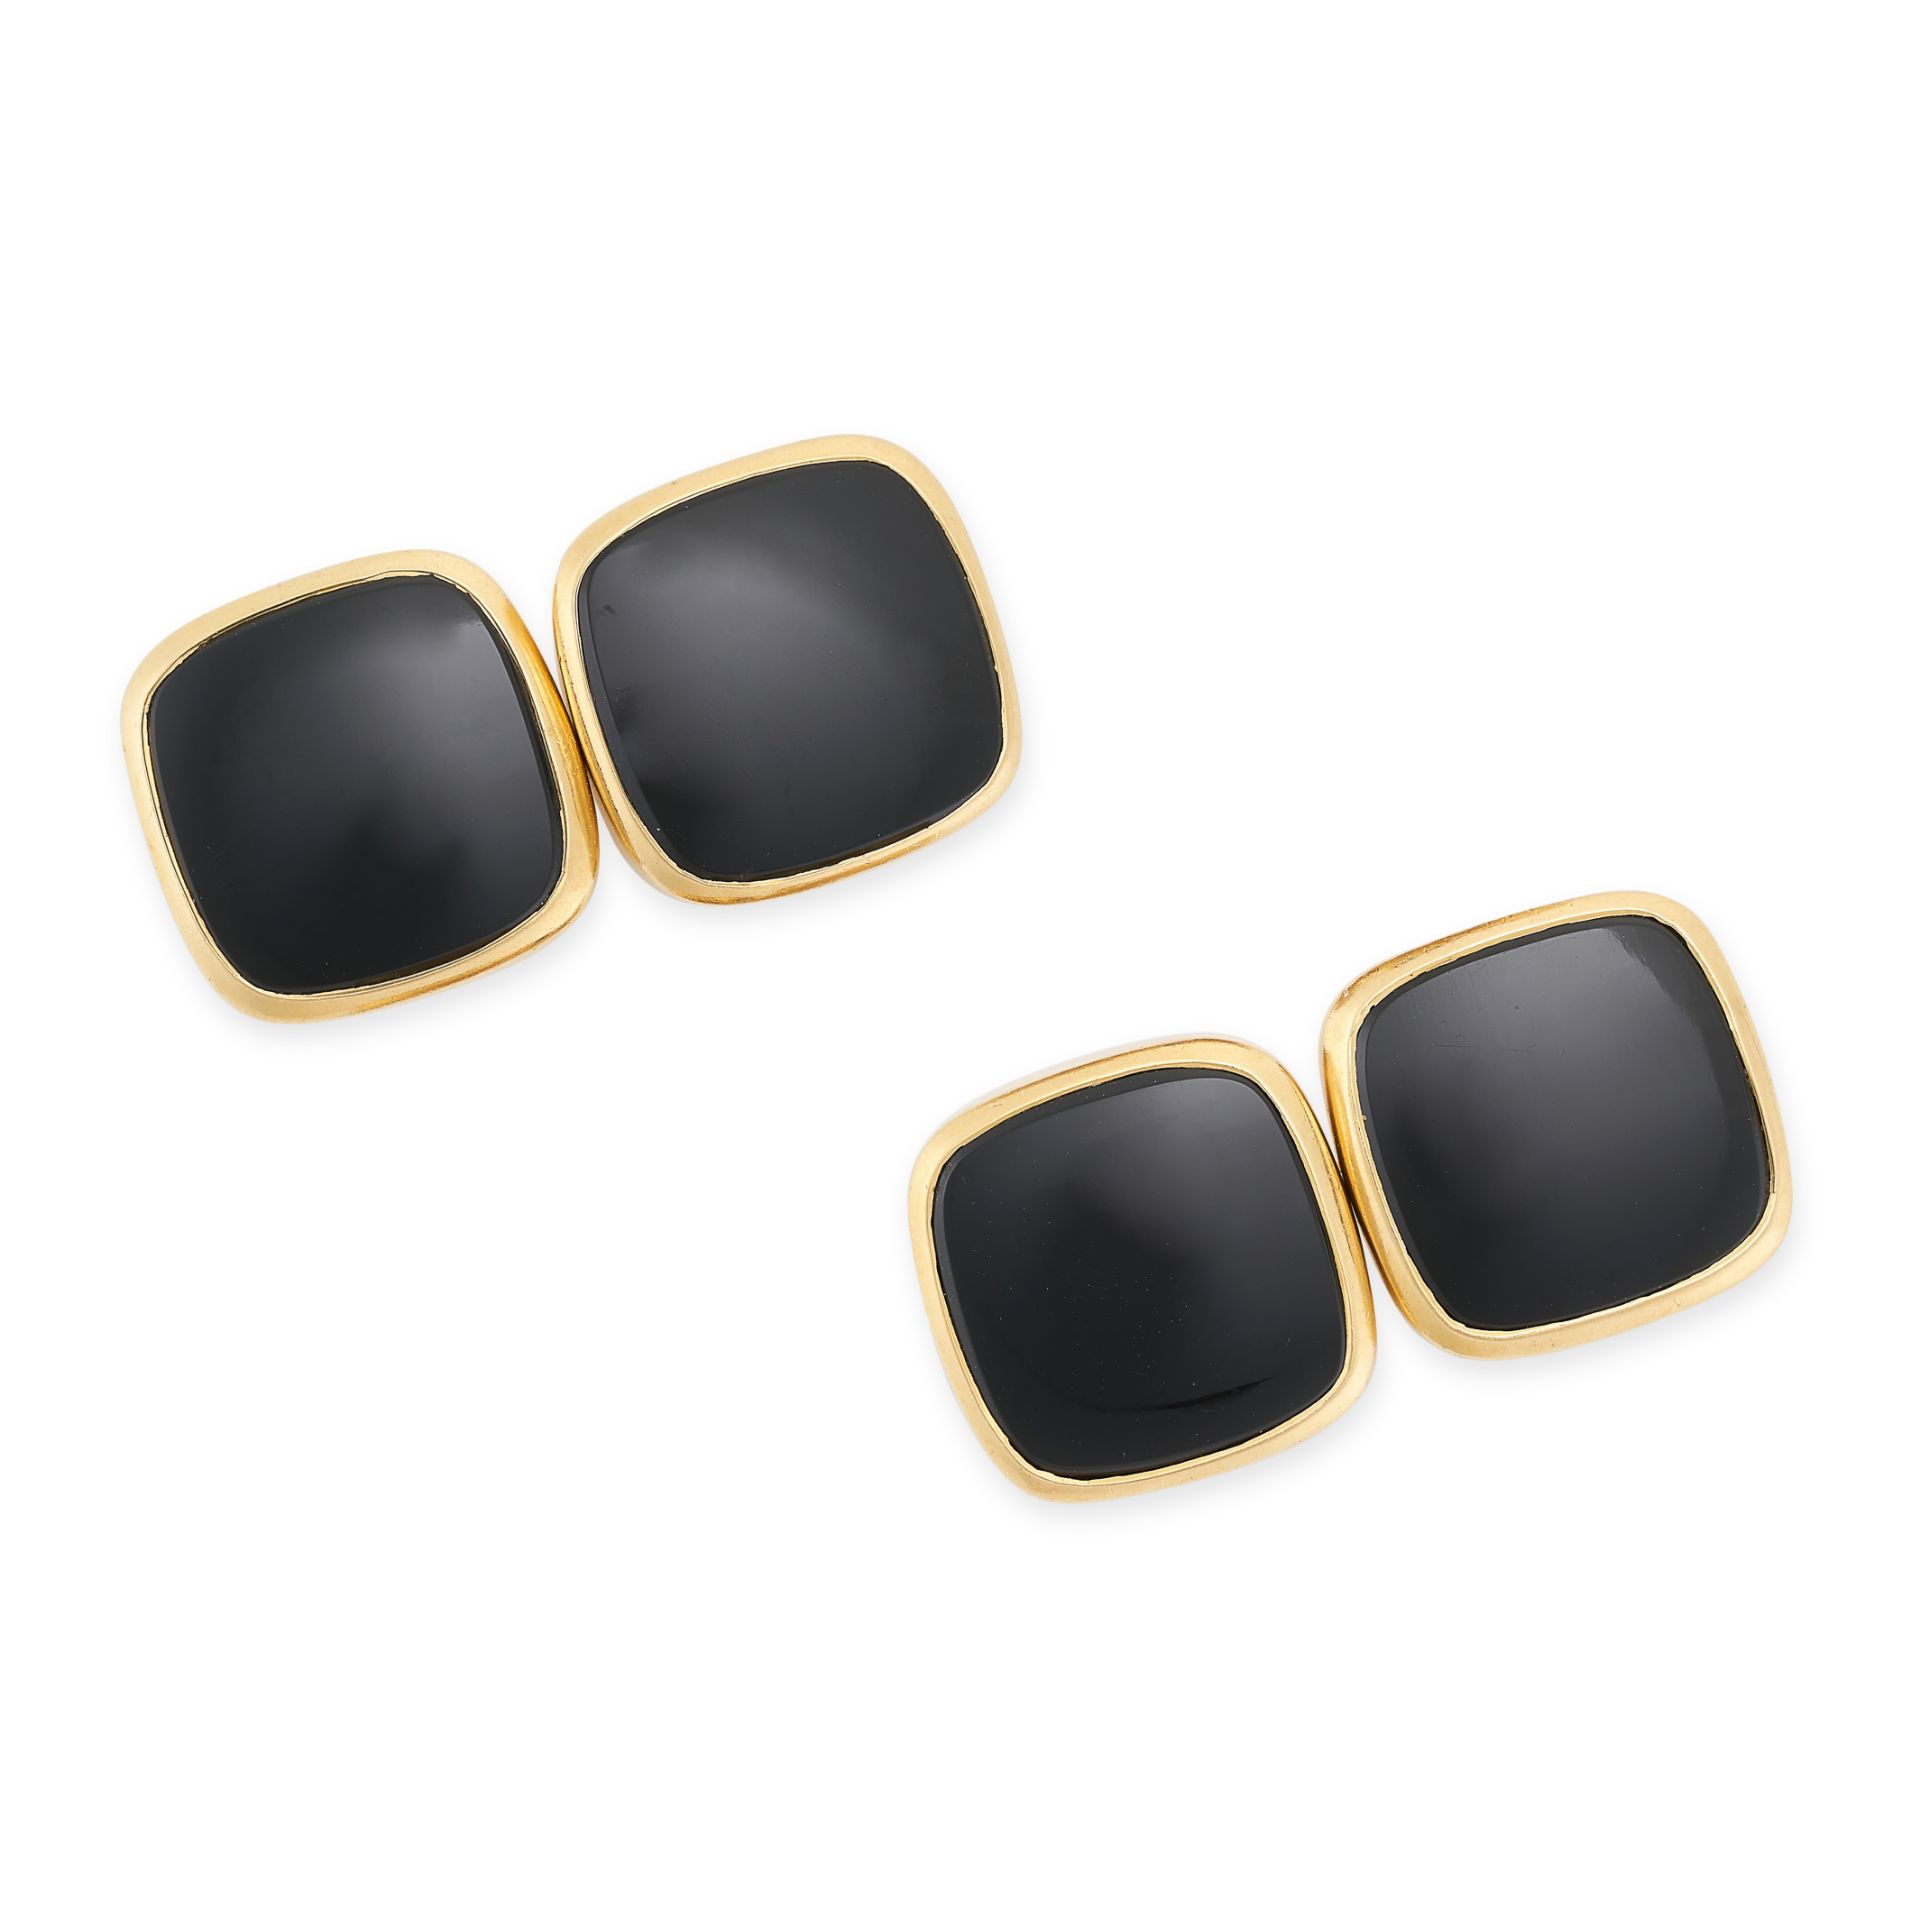 A PAIR OF VINTAGE ONYX CUFFLINKS in 18ct yellow gold, set with pieces of polished onyx within a gold